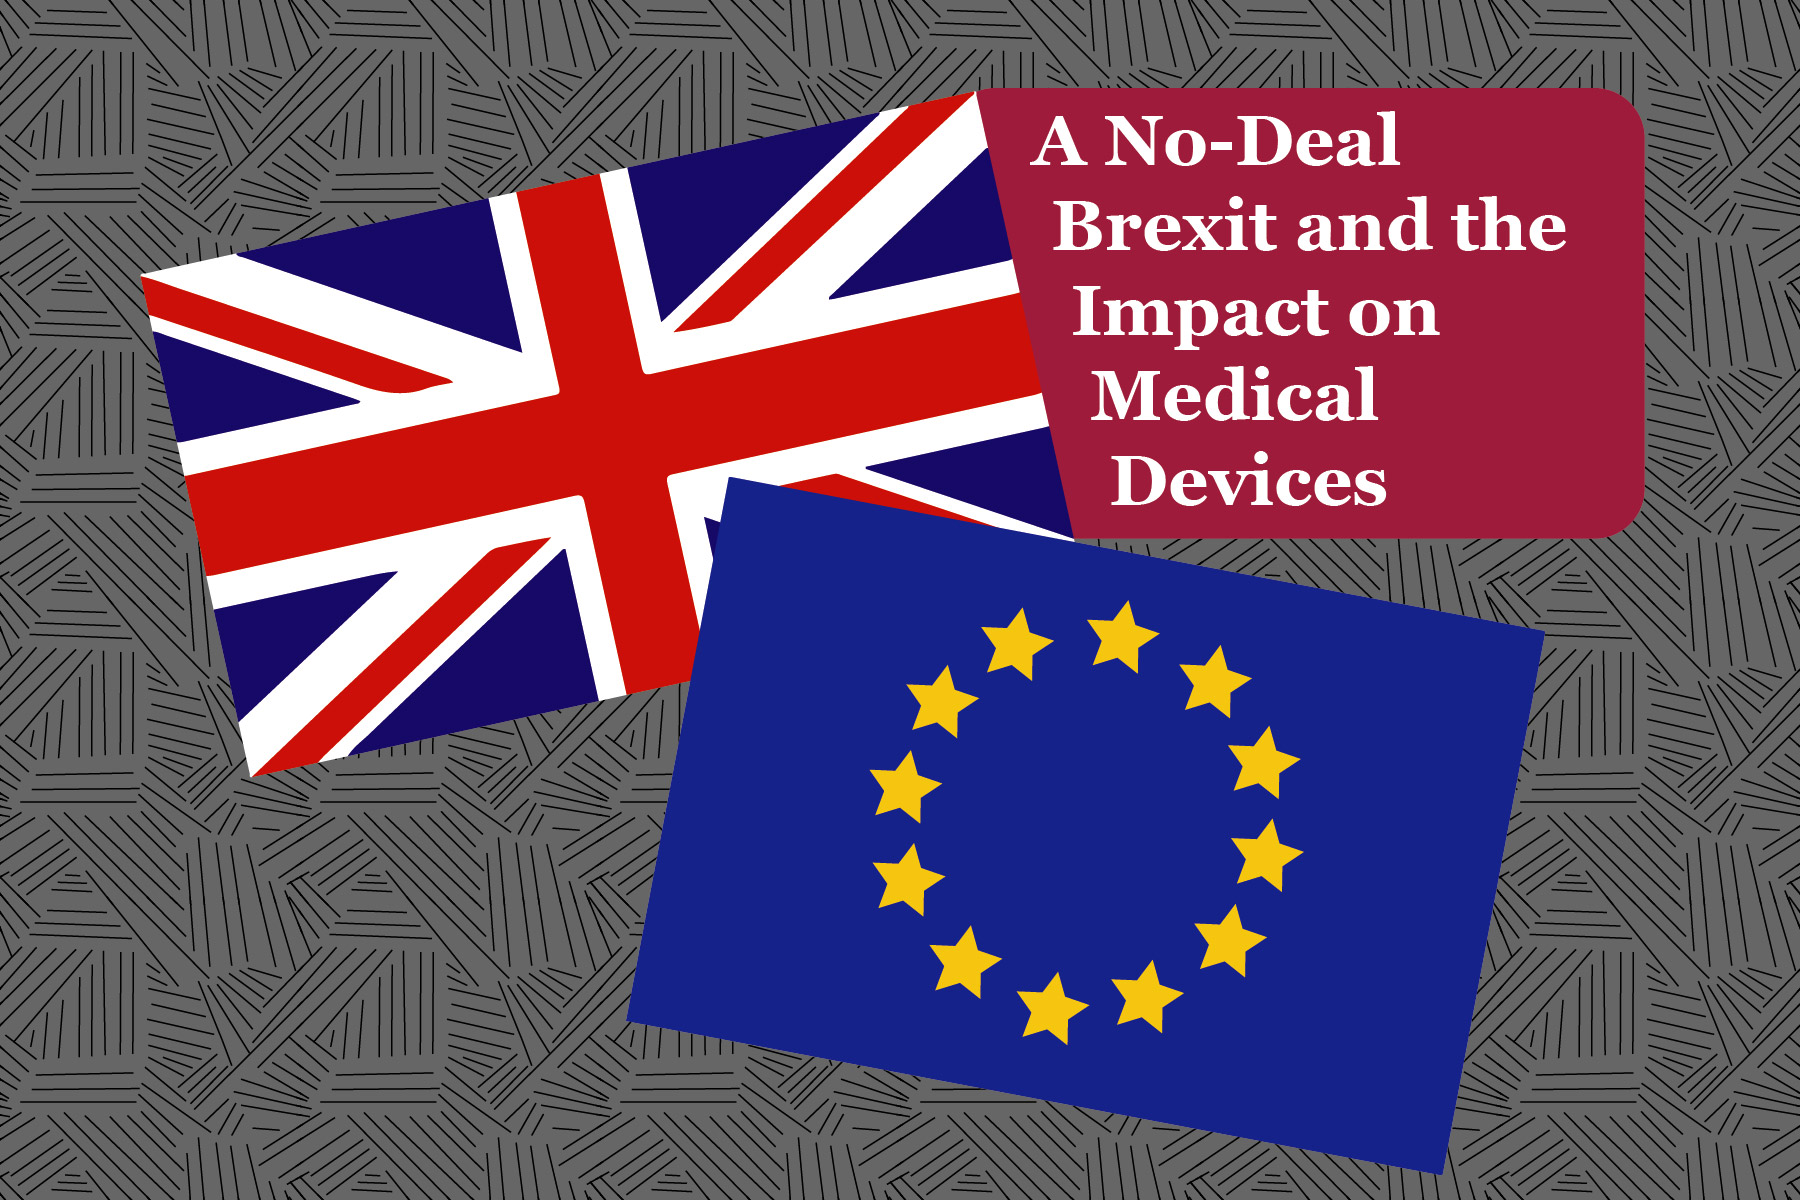 A No-Deal Brexit and the Impact on Medical Devices